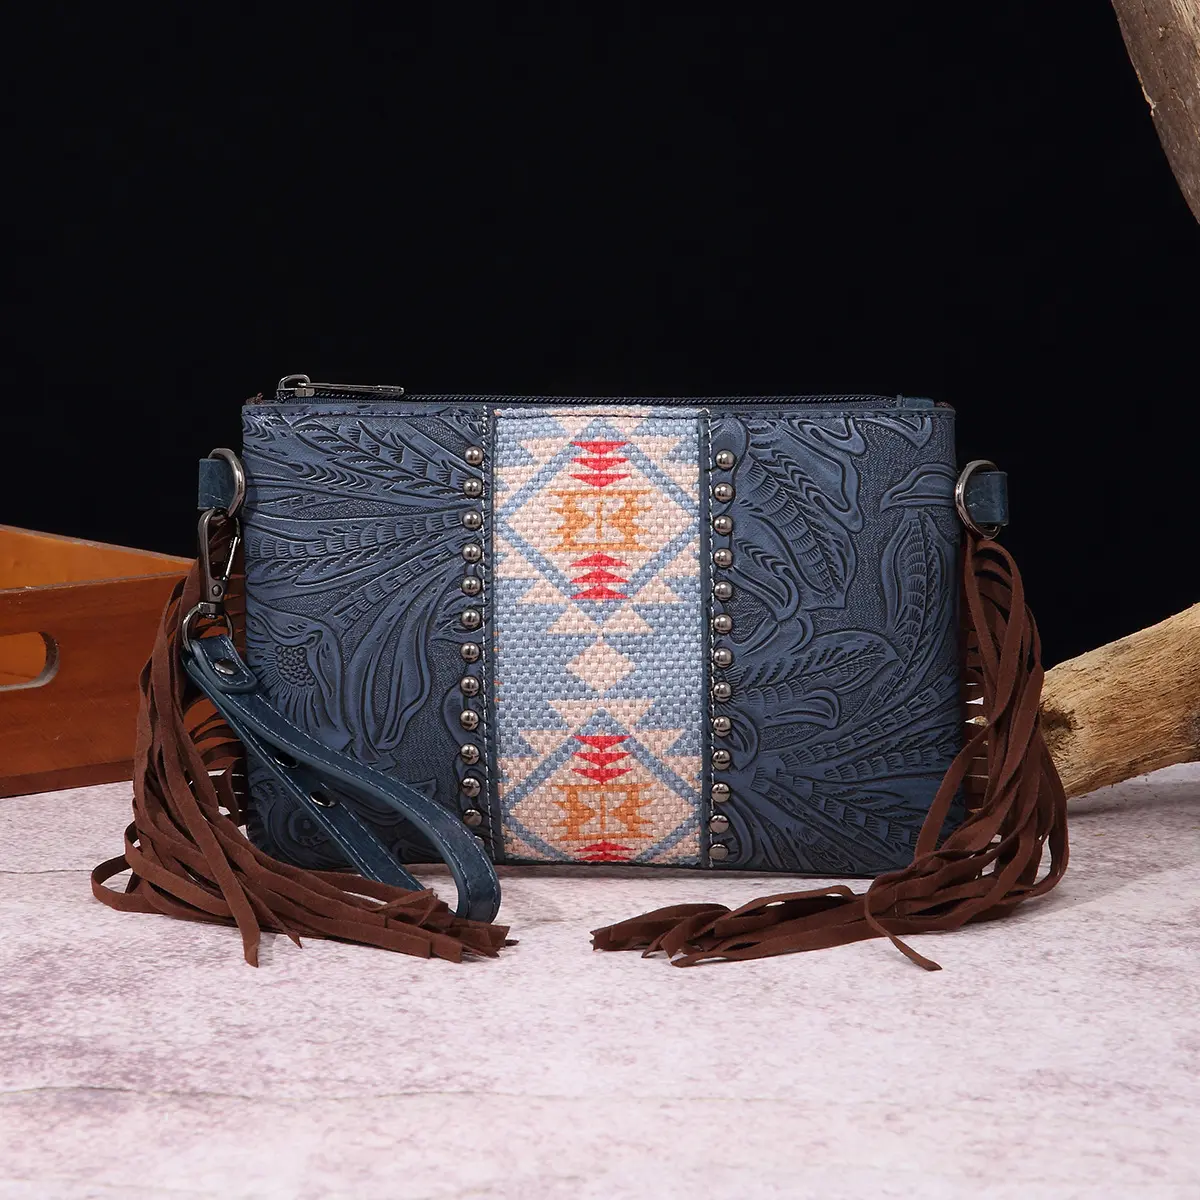 Vintage Women Waist Bag Western Bohemian Leather Carving Fanny Pack Pu Clutch Bag With Tassel